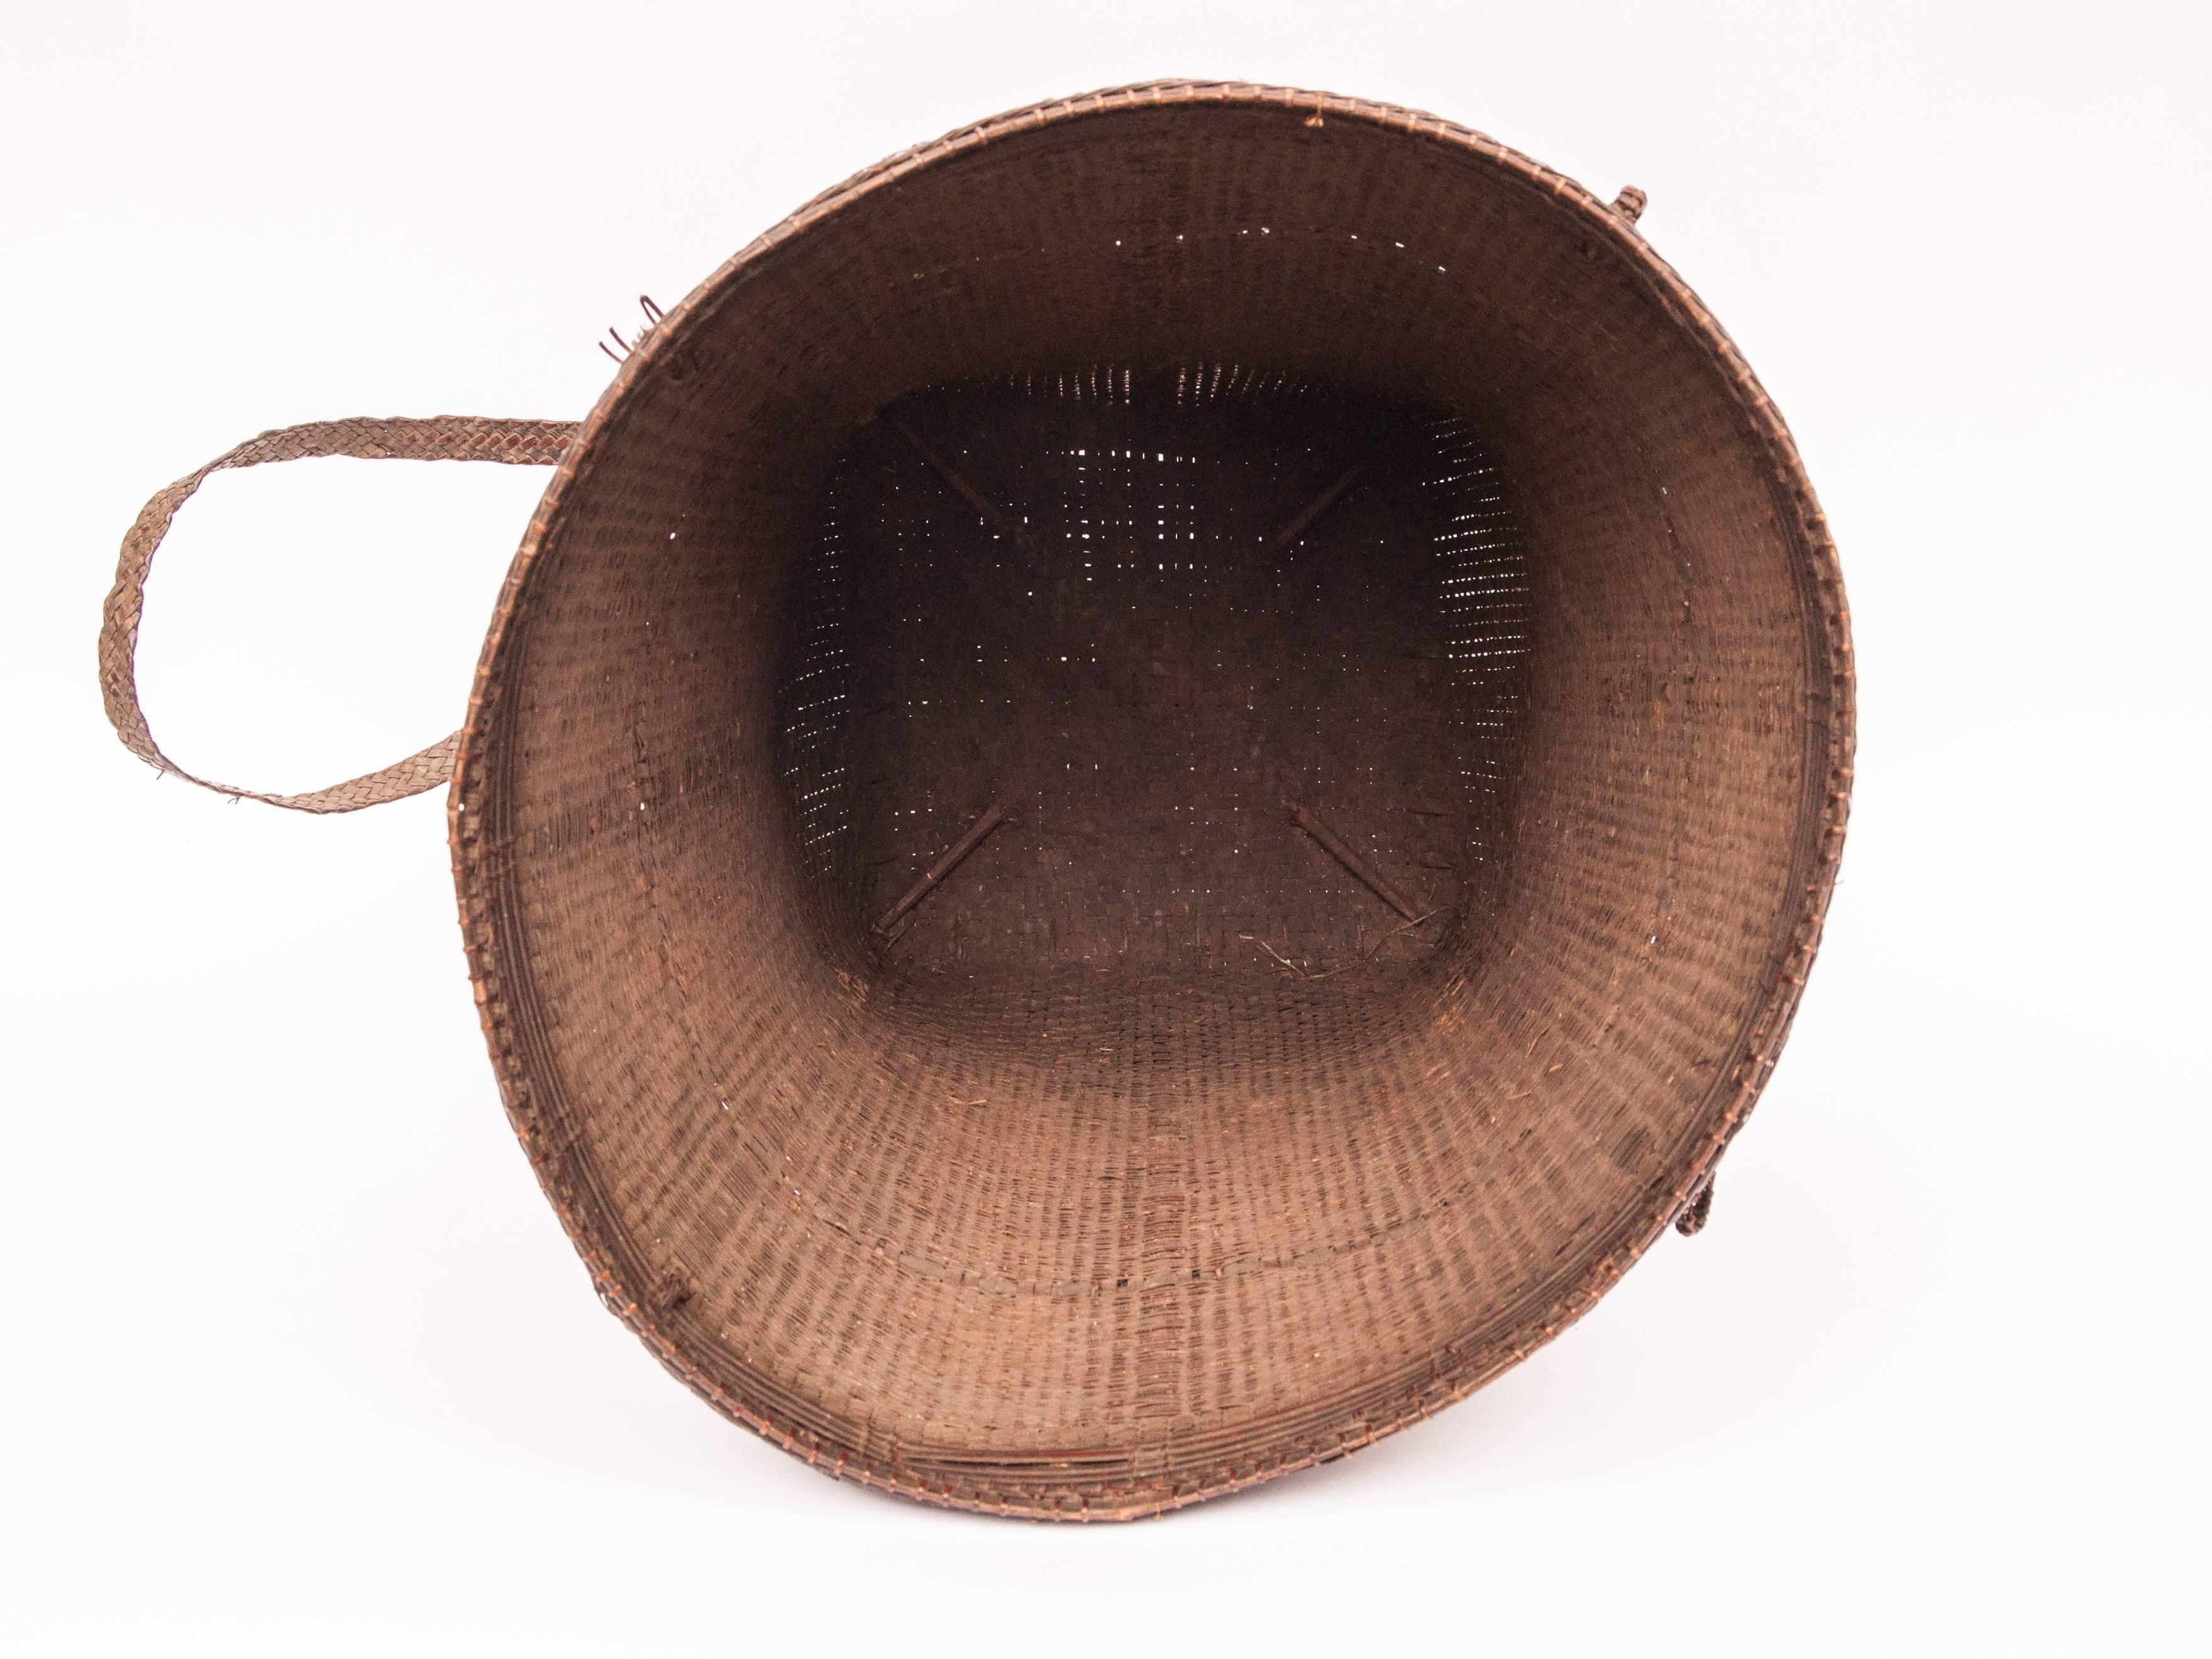 Tribal Carrying Basket from Laos, Mid-20th Century, Bamboo, Rattan, Wood Base 13